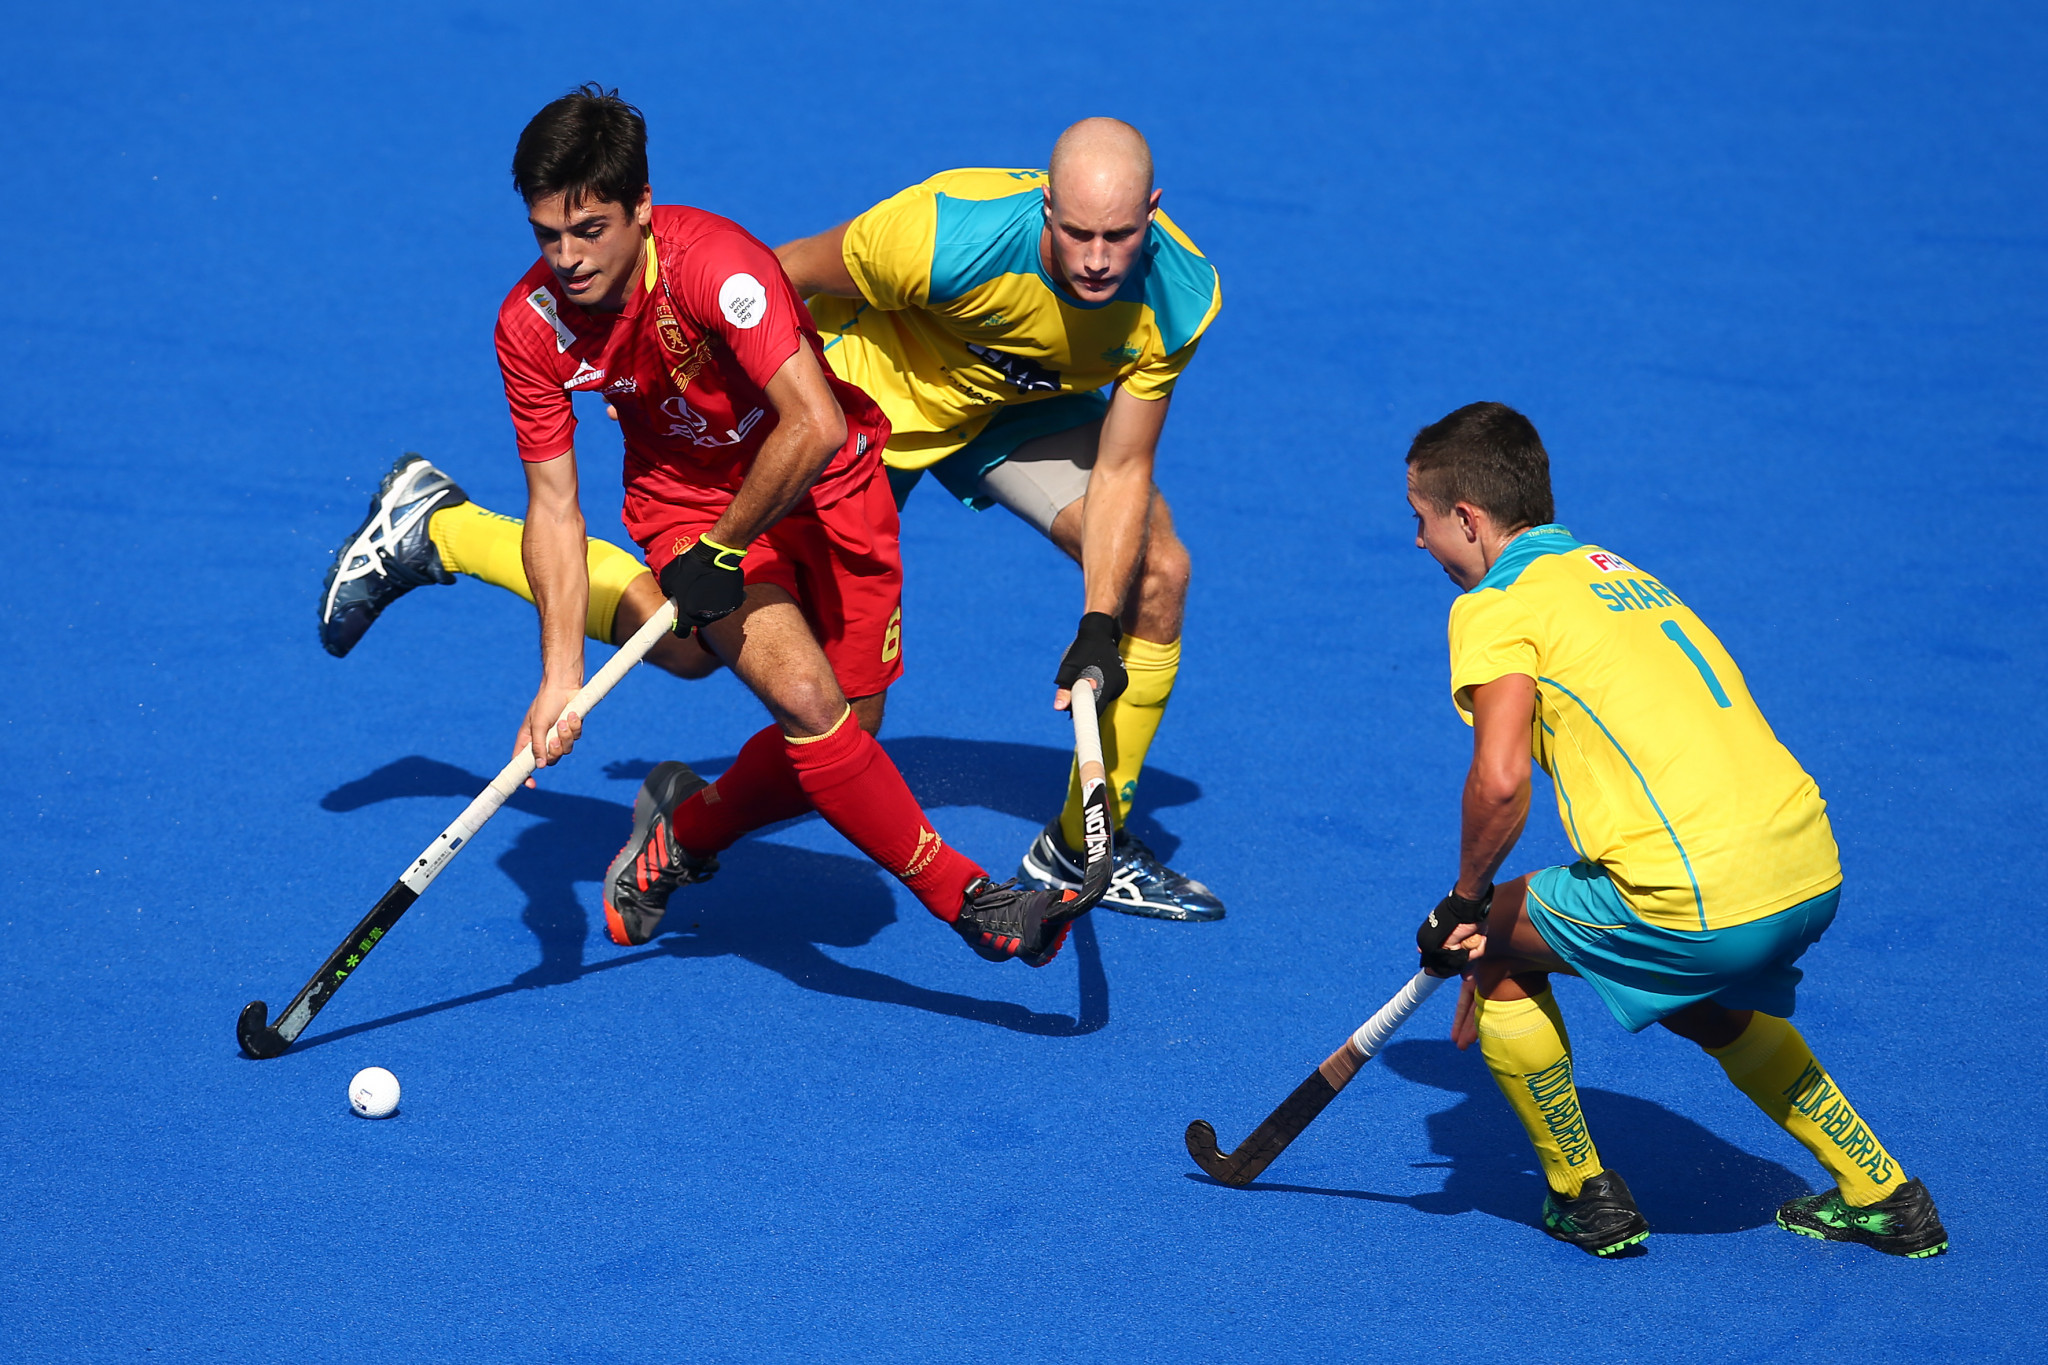 Australia's men were also made to work hard for their win as they edged Spain 2-1 ©Getty Images